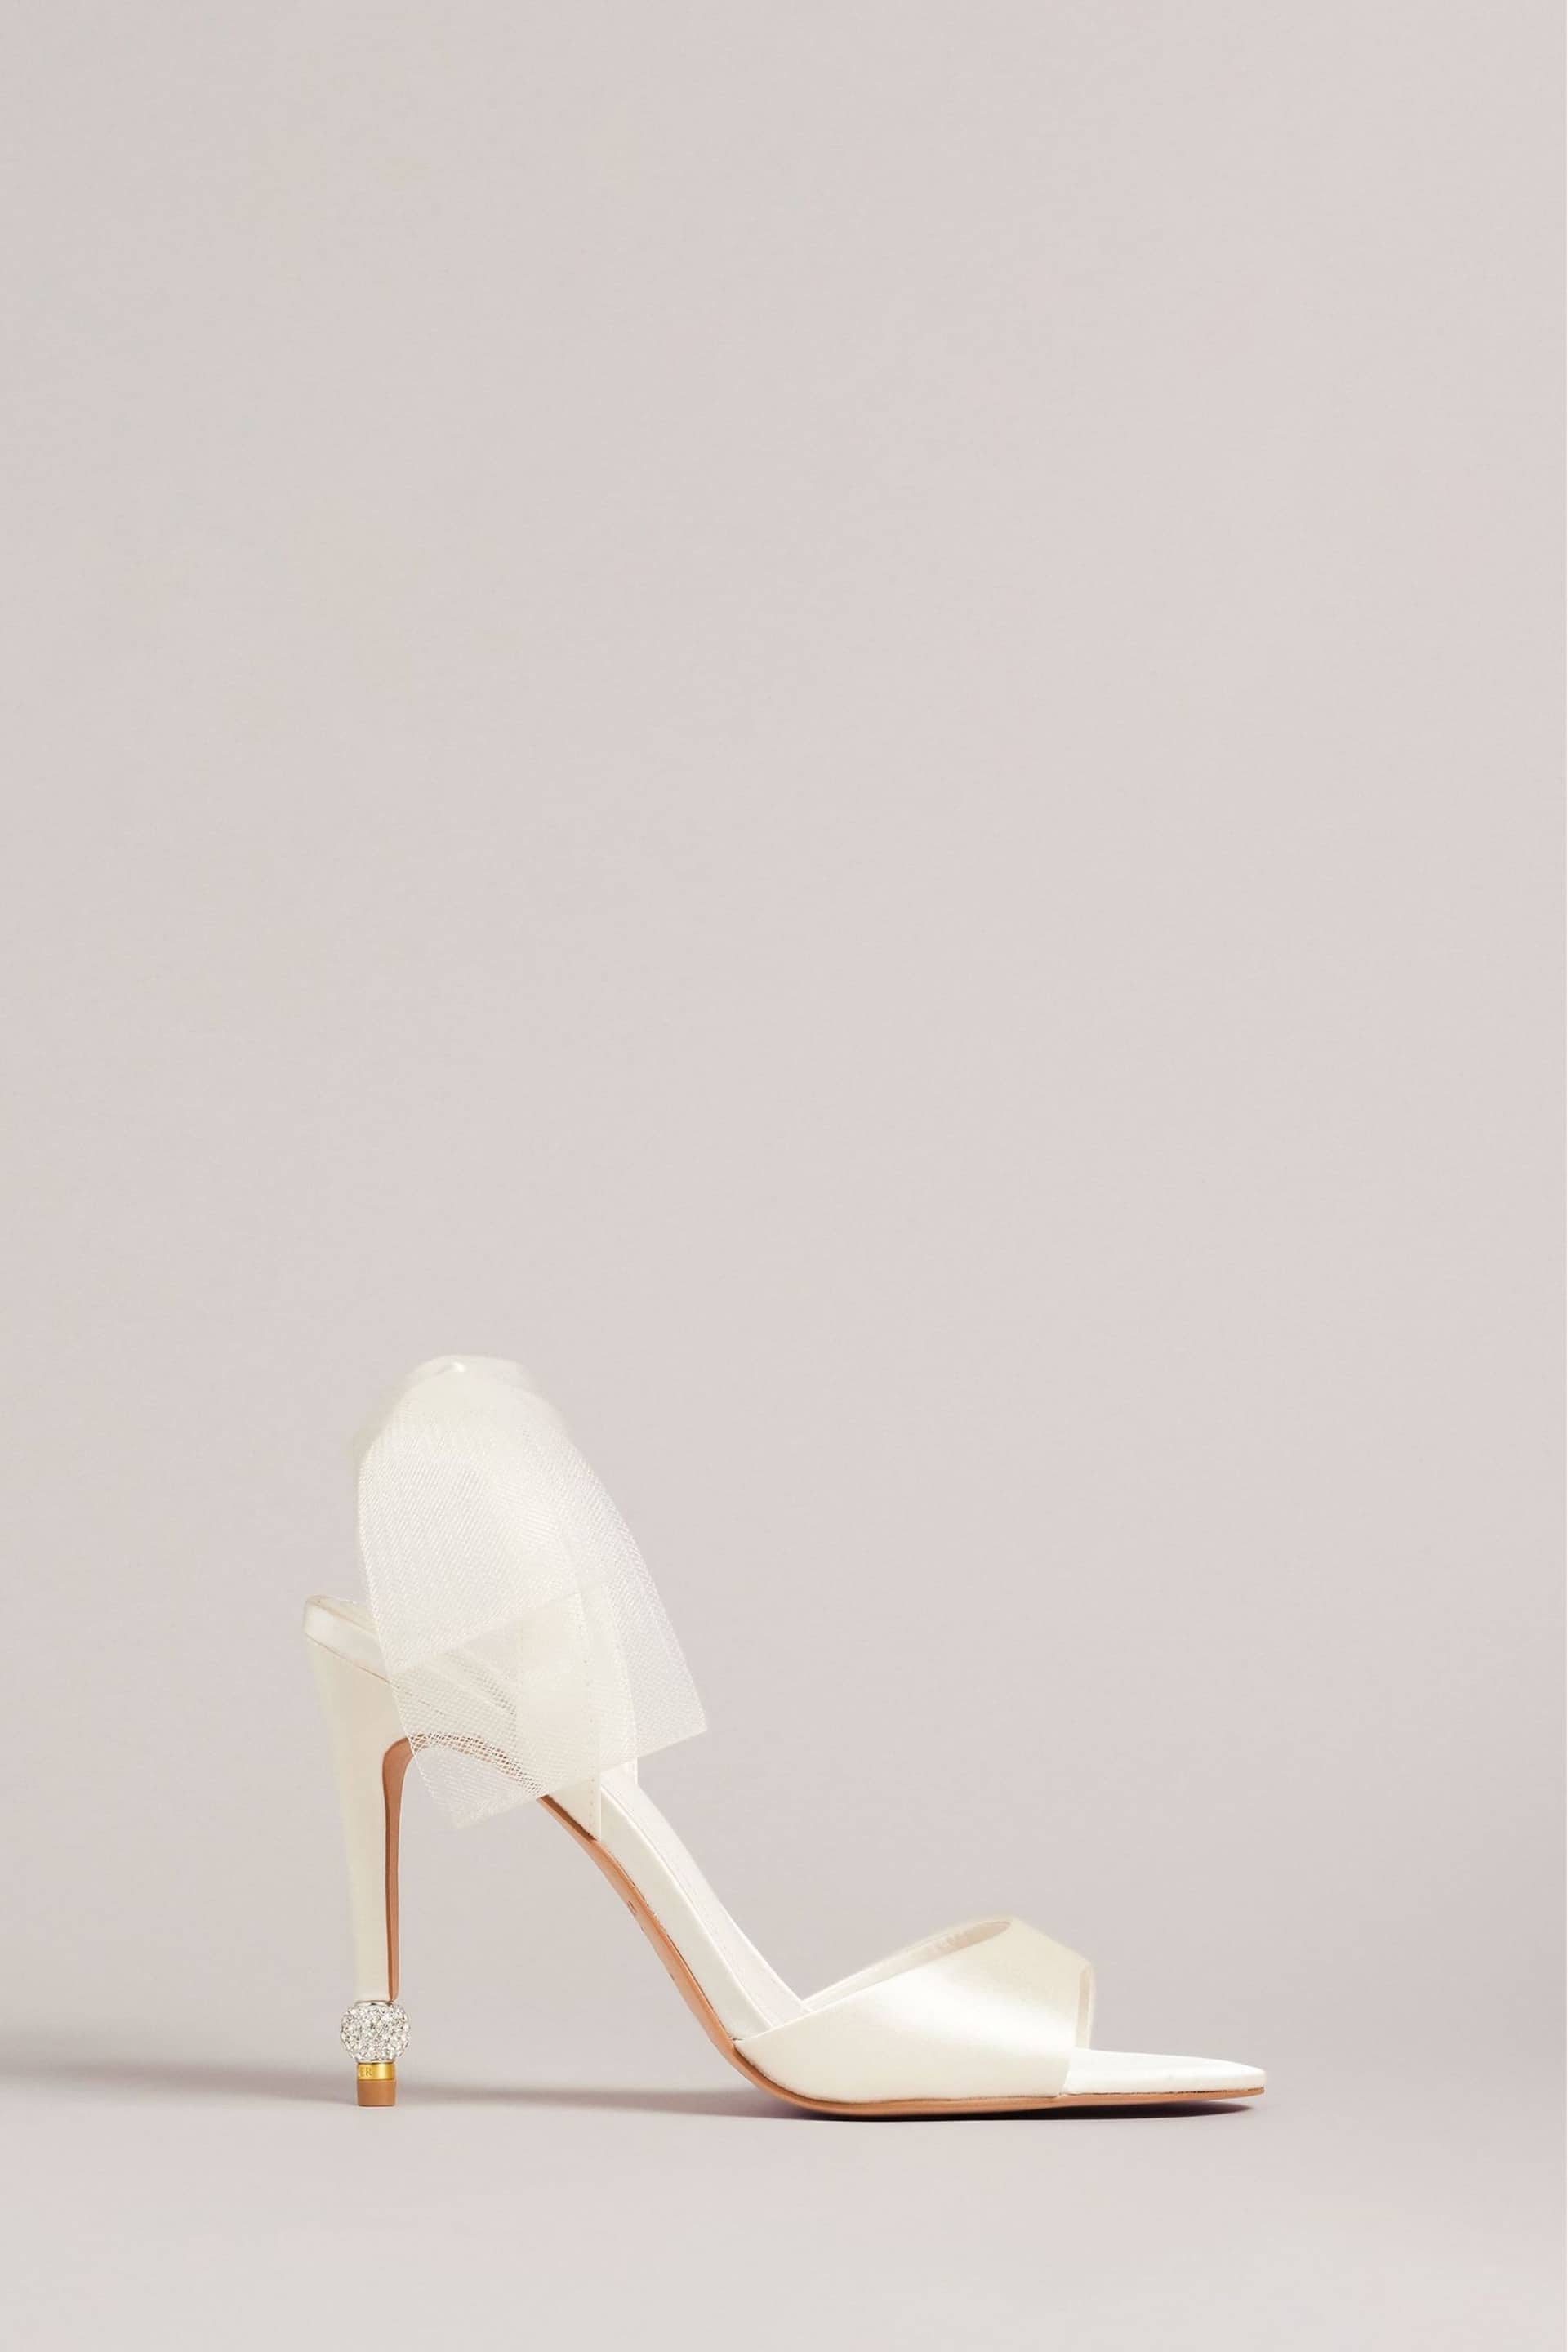 Ted Baker Natural Harinas Oversized Bow Back Sandals - Image 1 of 5